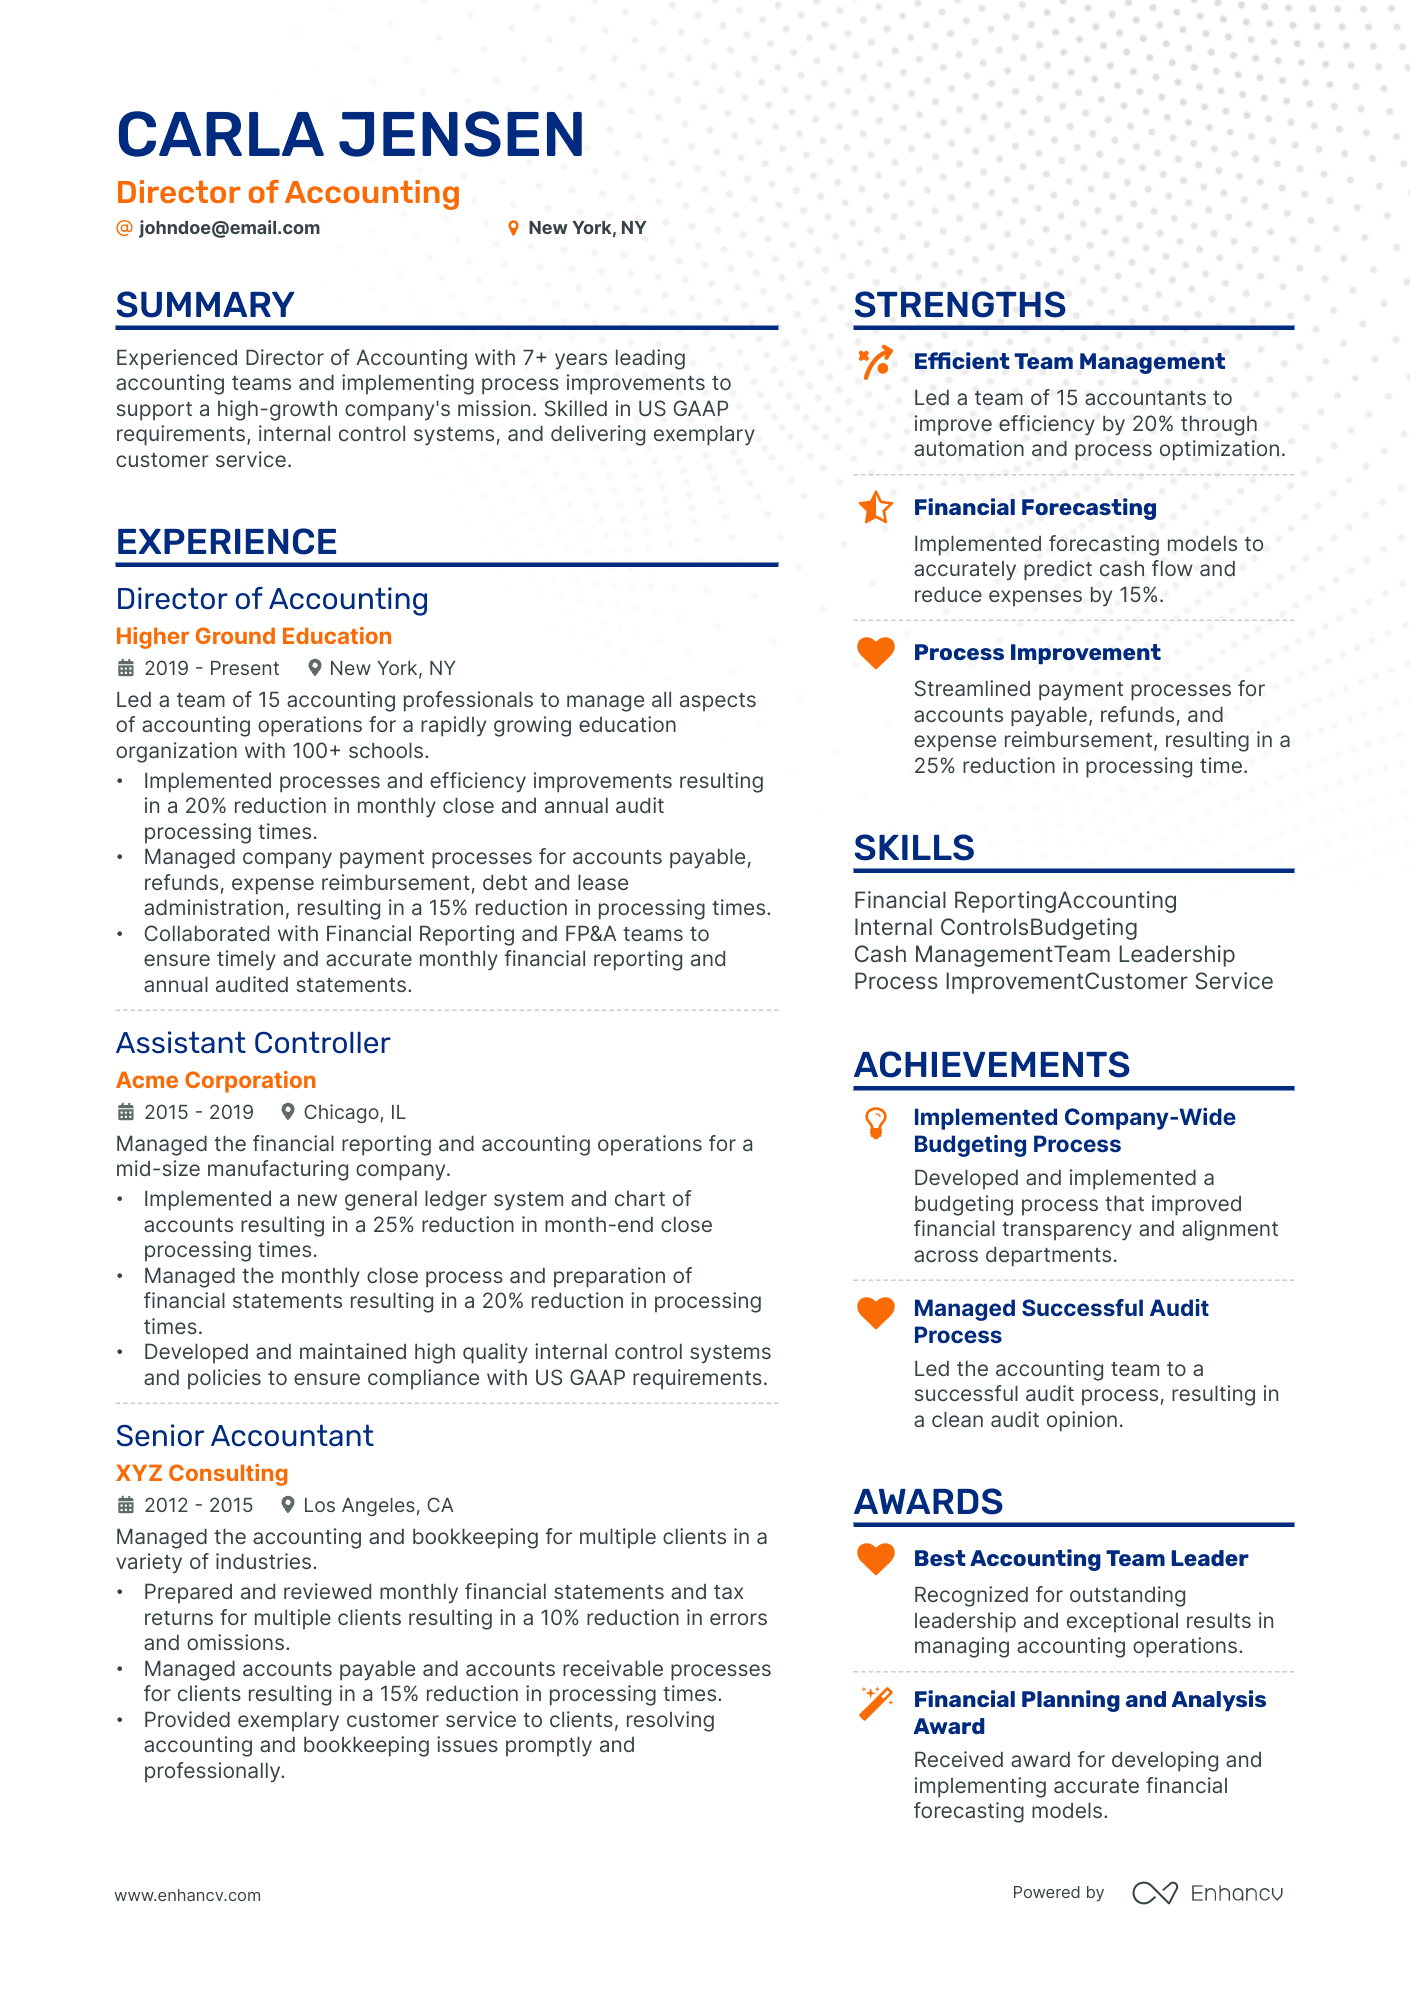 Director of Accounting resume example